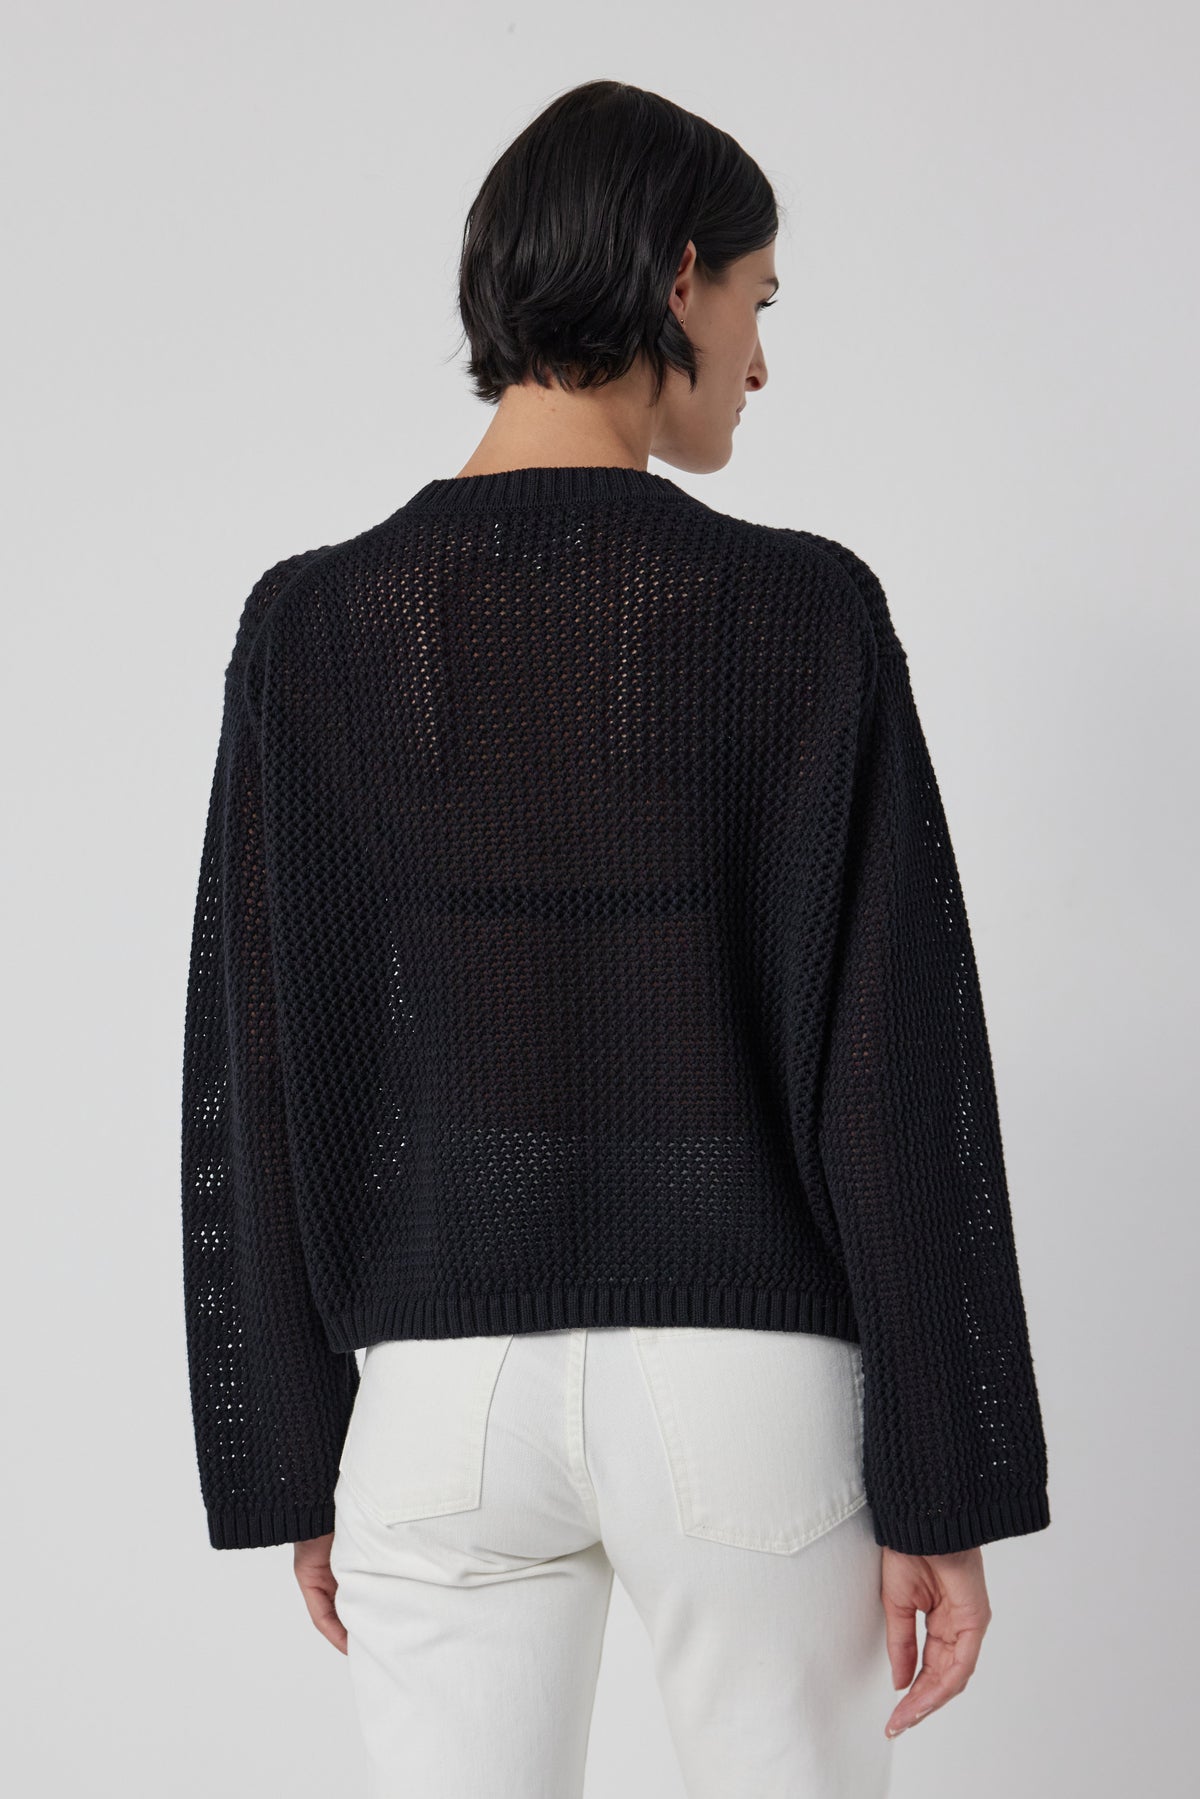 The back view of a woman wearing a lightweight Velvet by Jenny Graham Kanan Sweater and white jeans.-36168698462401